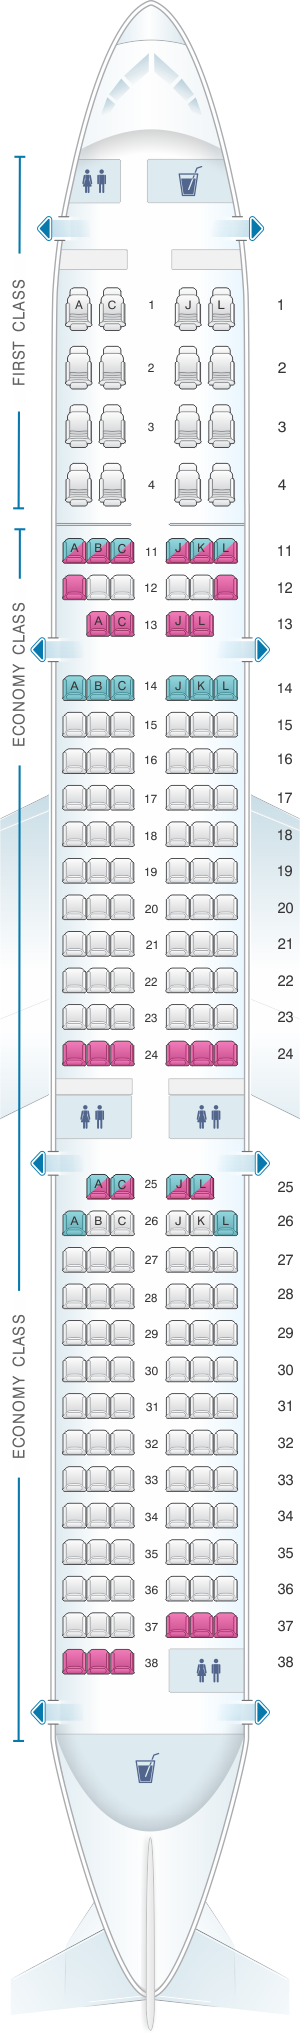 Seat Map Air China Airbus A321 200 Config. 2 | SeatMaestro